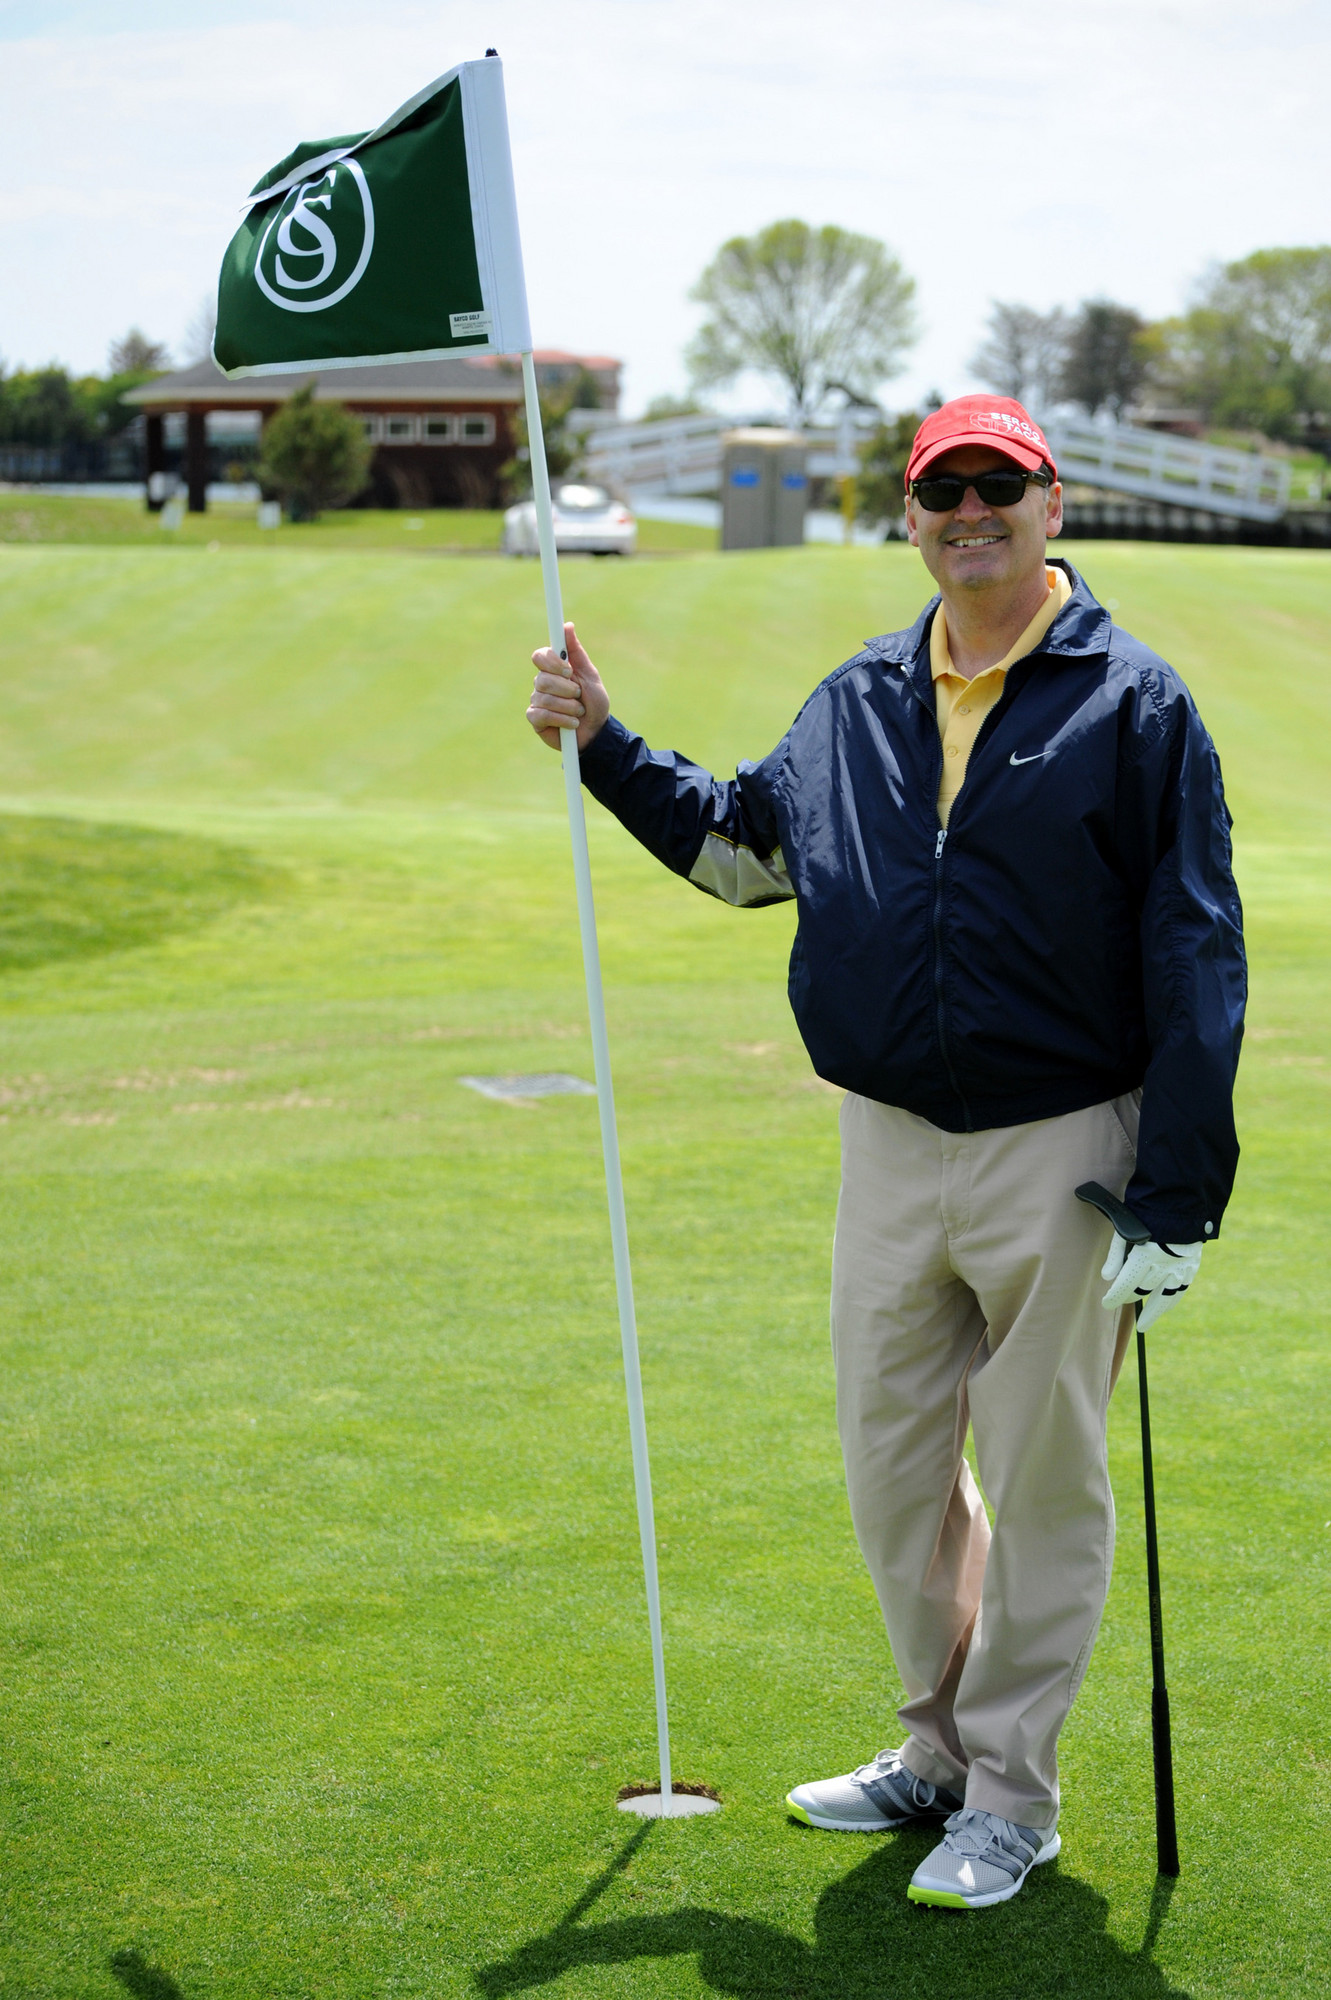 Bill Gaylor Jr. tended to the flagstick.